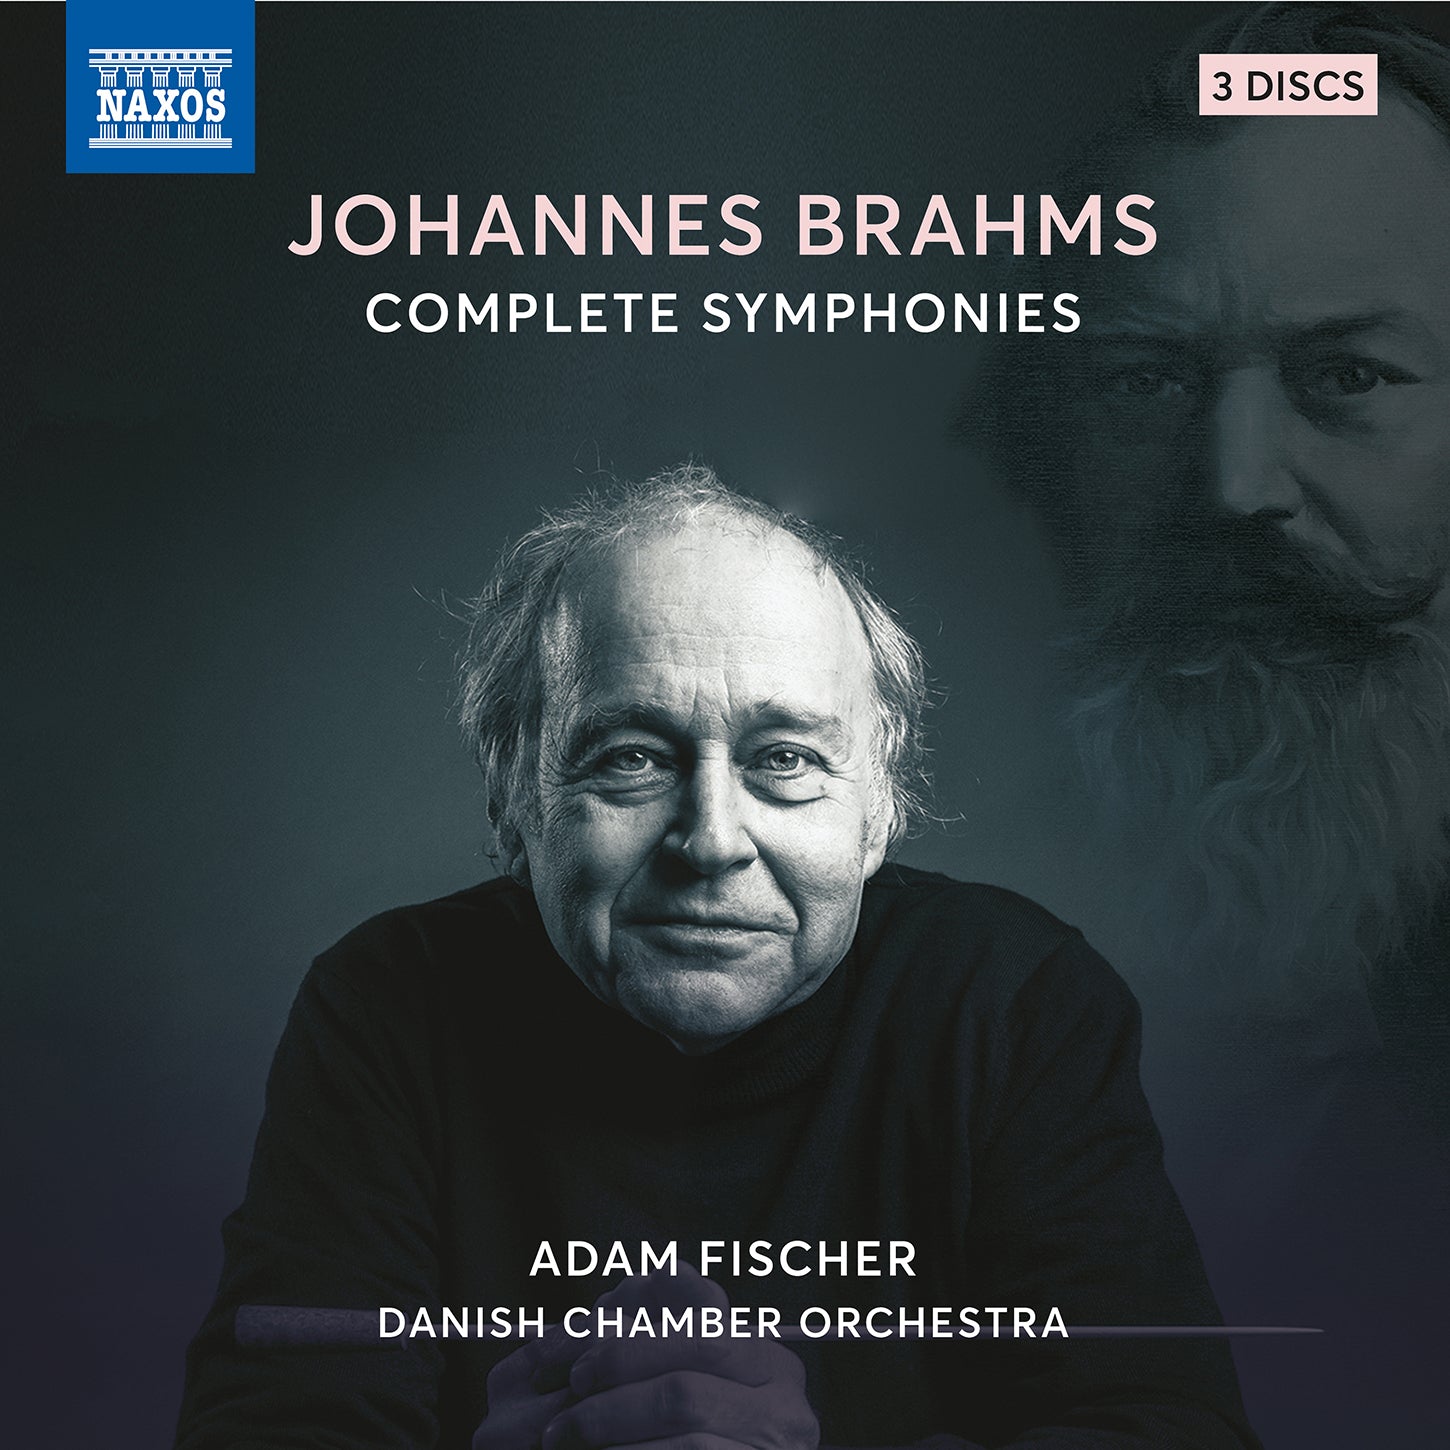 Brahms: The Complete Symphonies / Fischer, Danish Chamber Orchestra